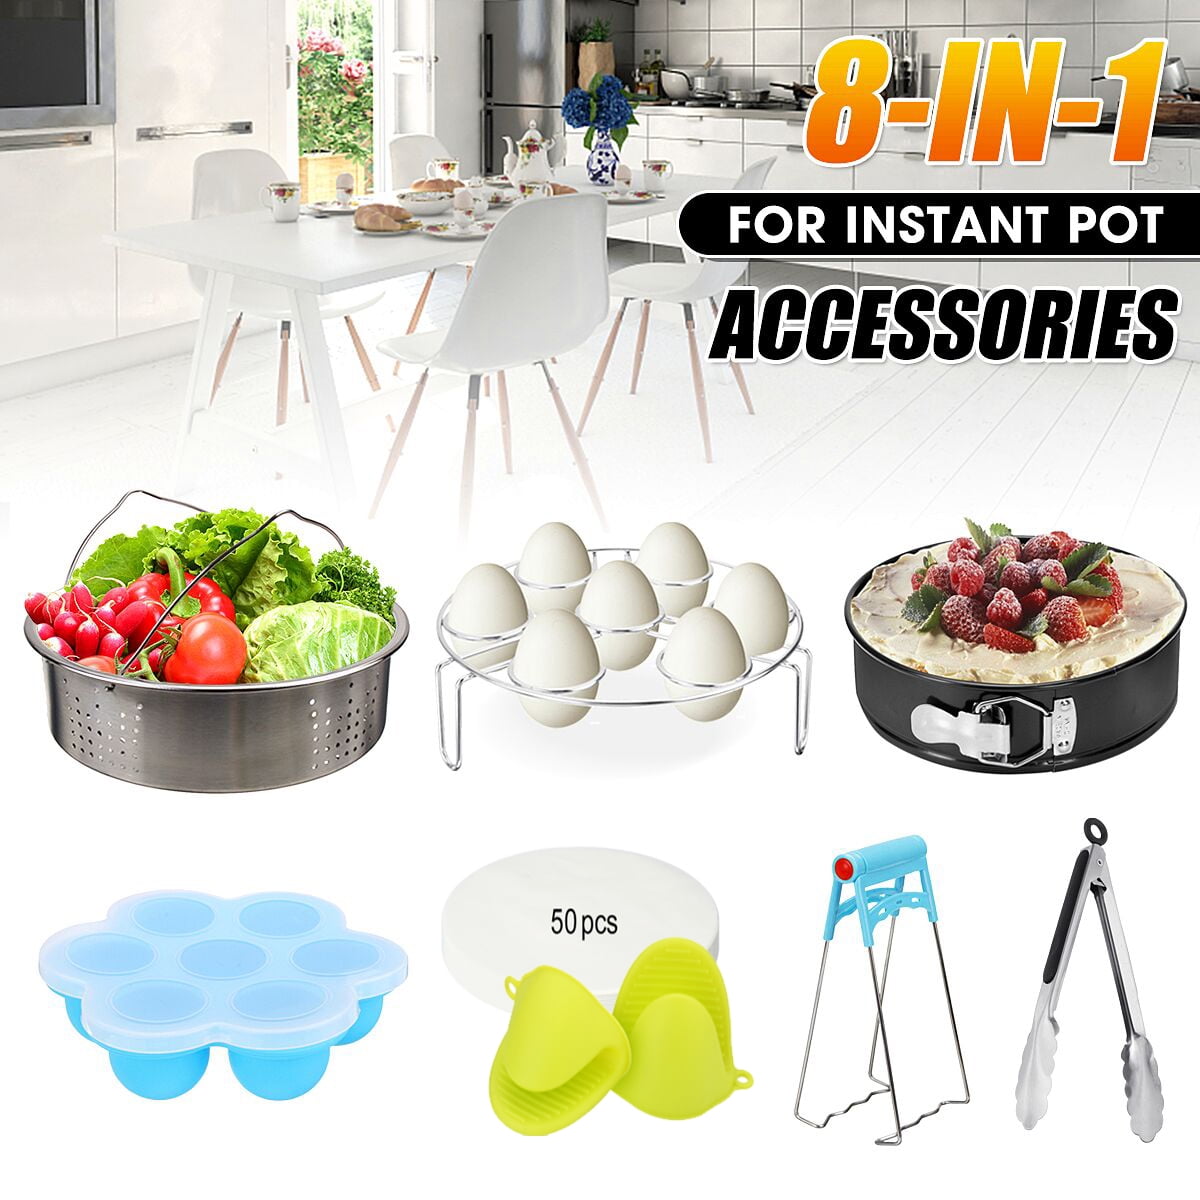 Instant Pot - SILICONE ACCESSORIES SALE!! SAVE 20% on